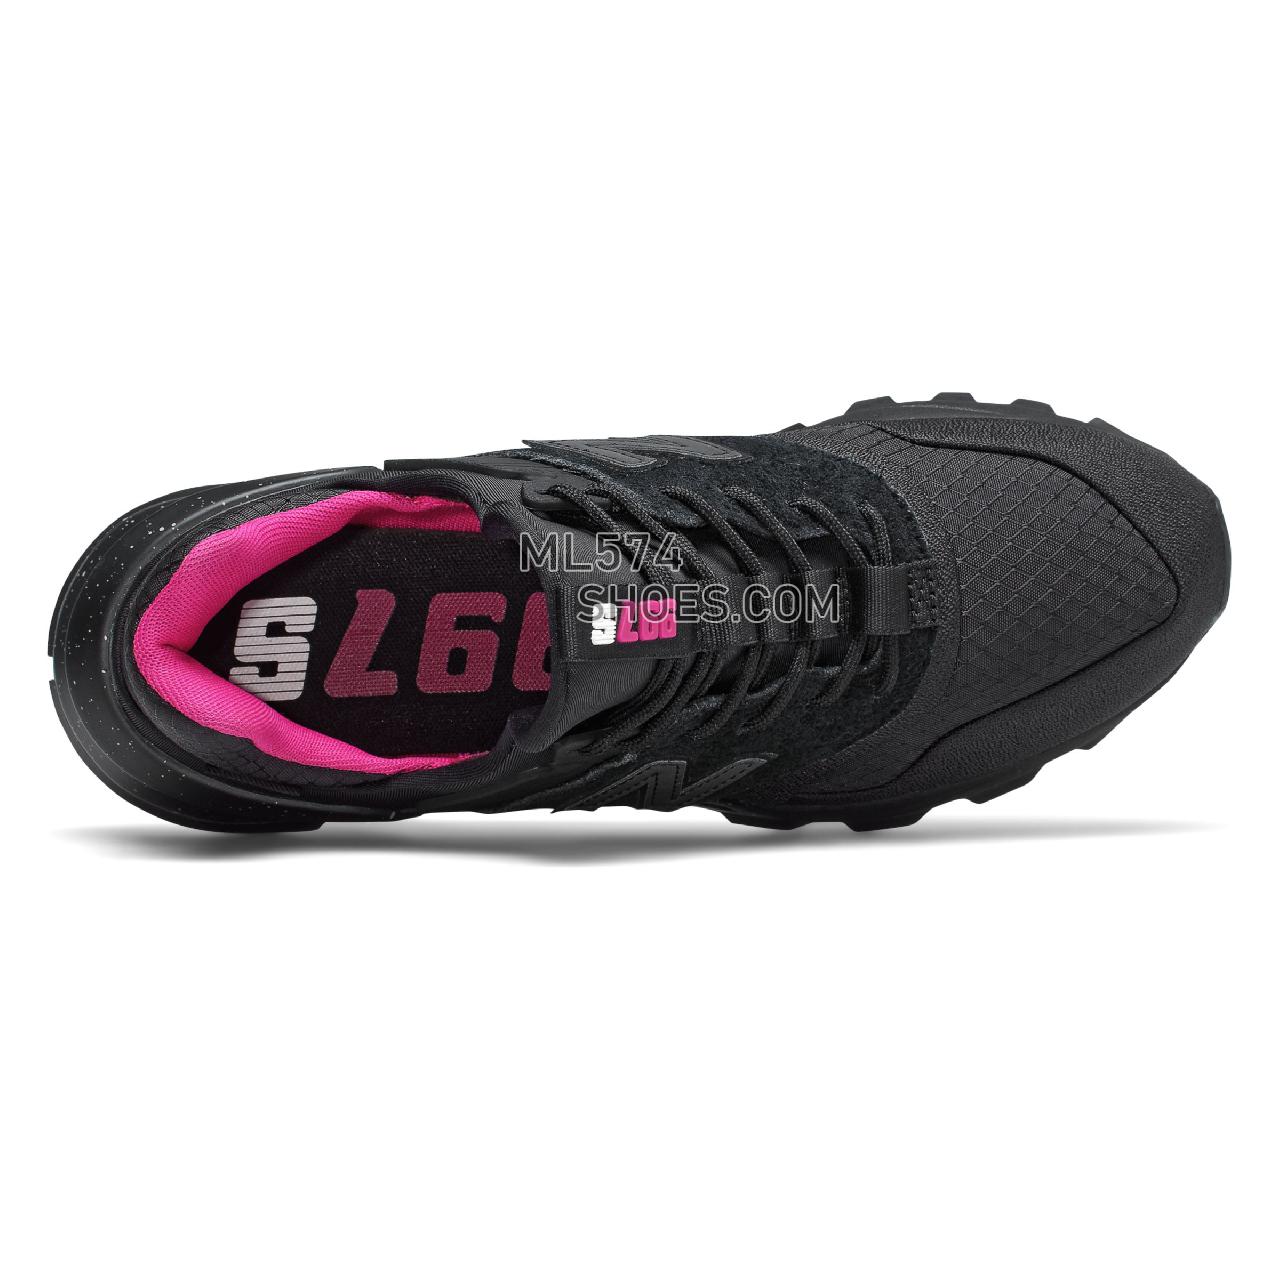 New Balance 997 Sport - Men's Sport Style Sneakers - Black with Pink - MS997SBP